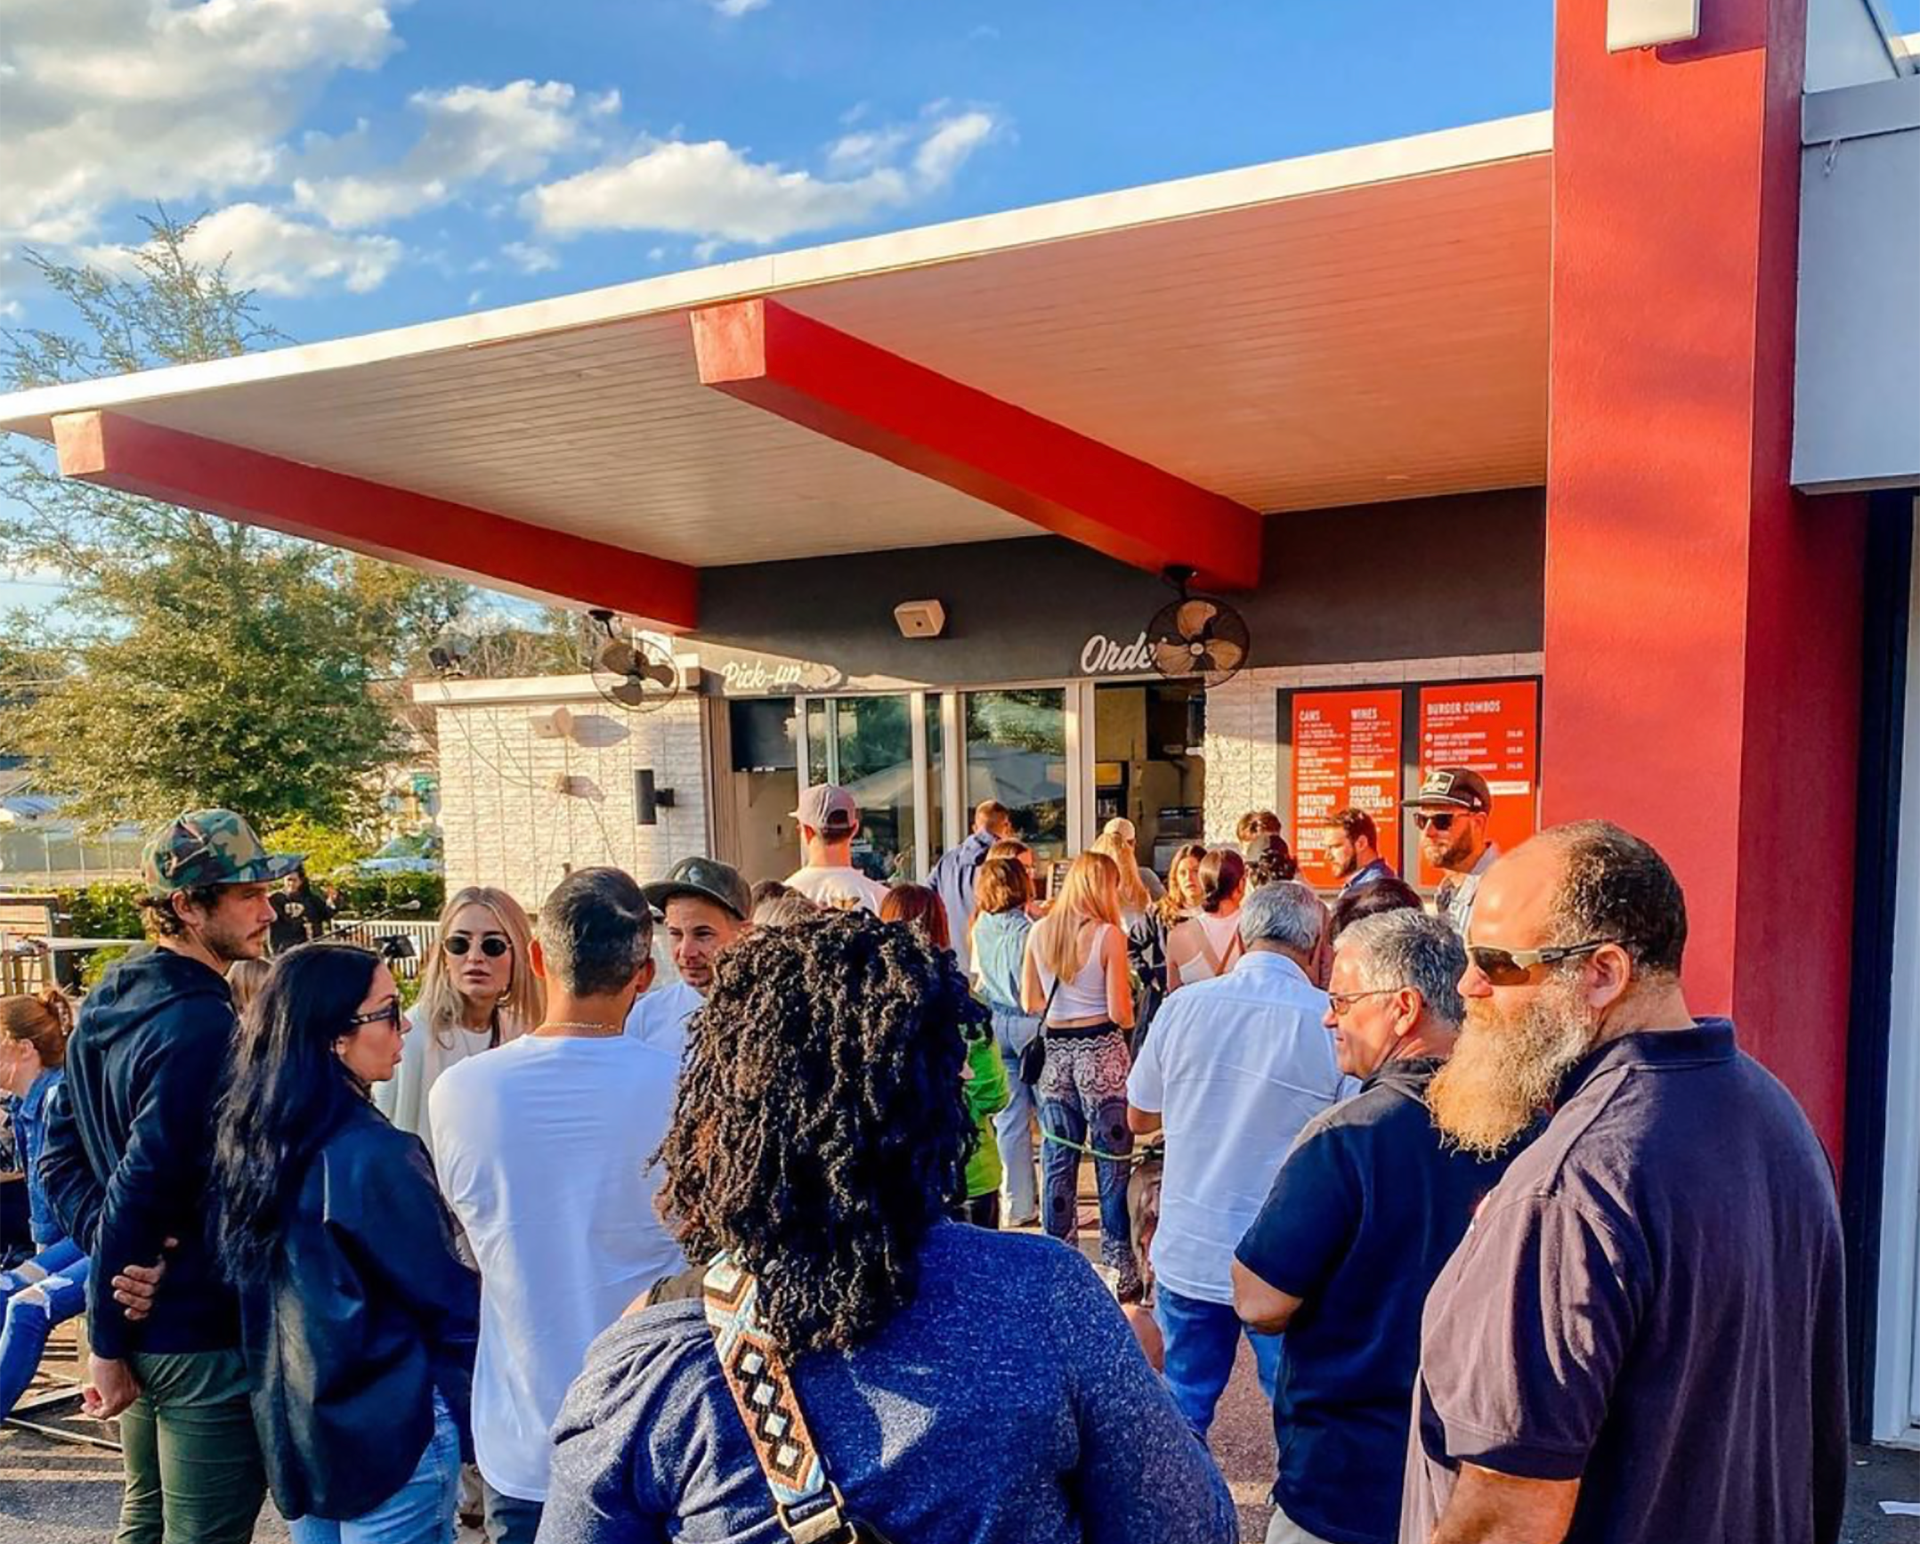 people line up outside a small burger order window